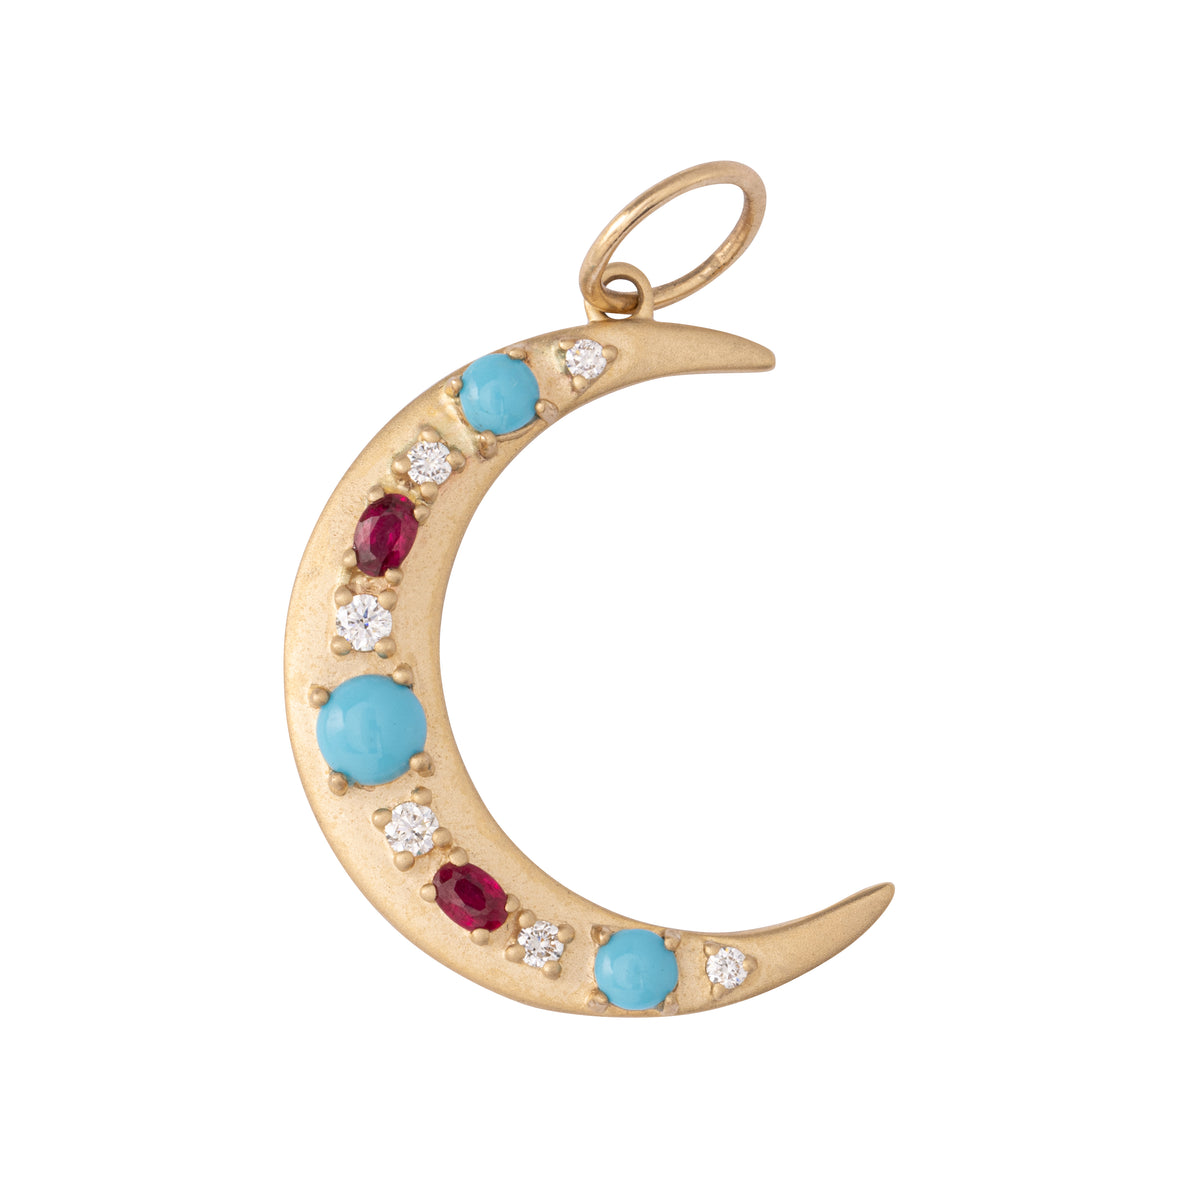 Turquoise, Ruby and Diamond Moon Charm